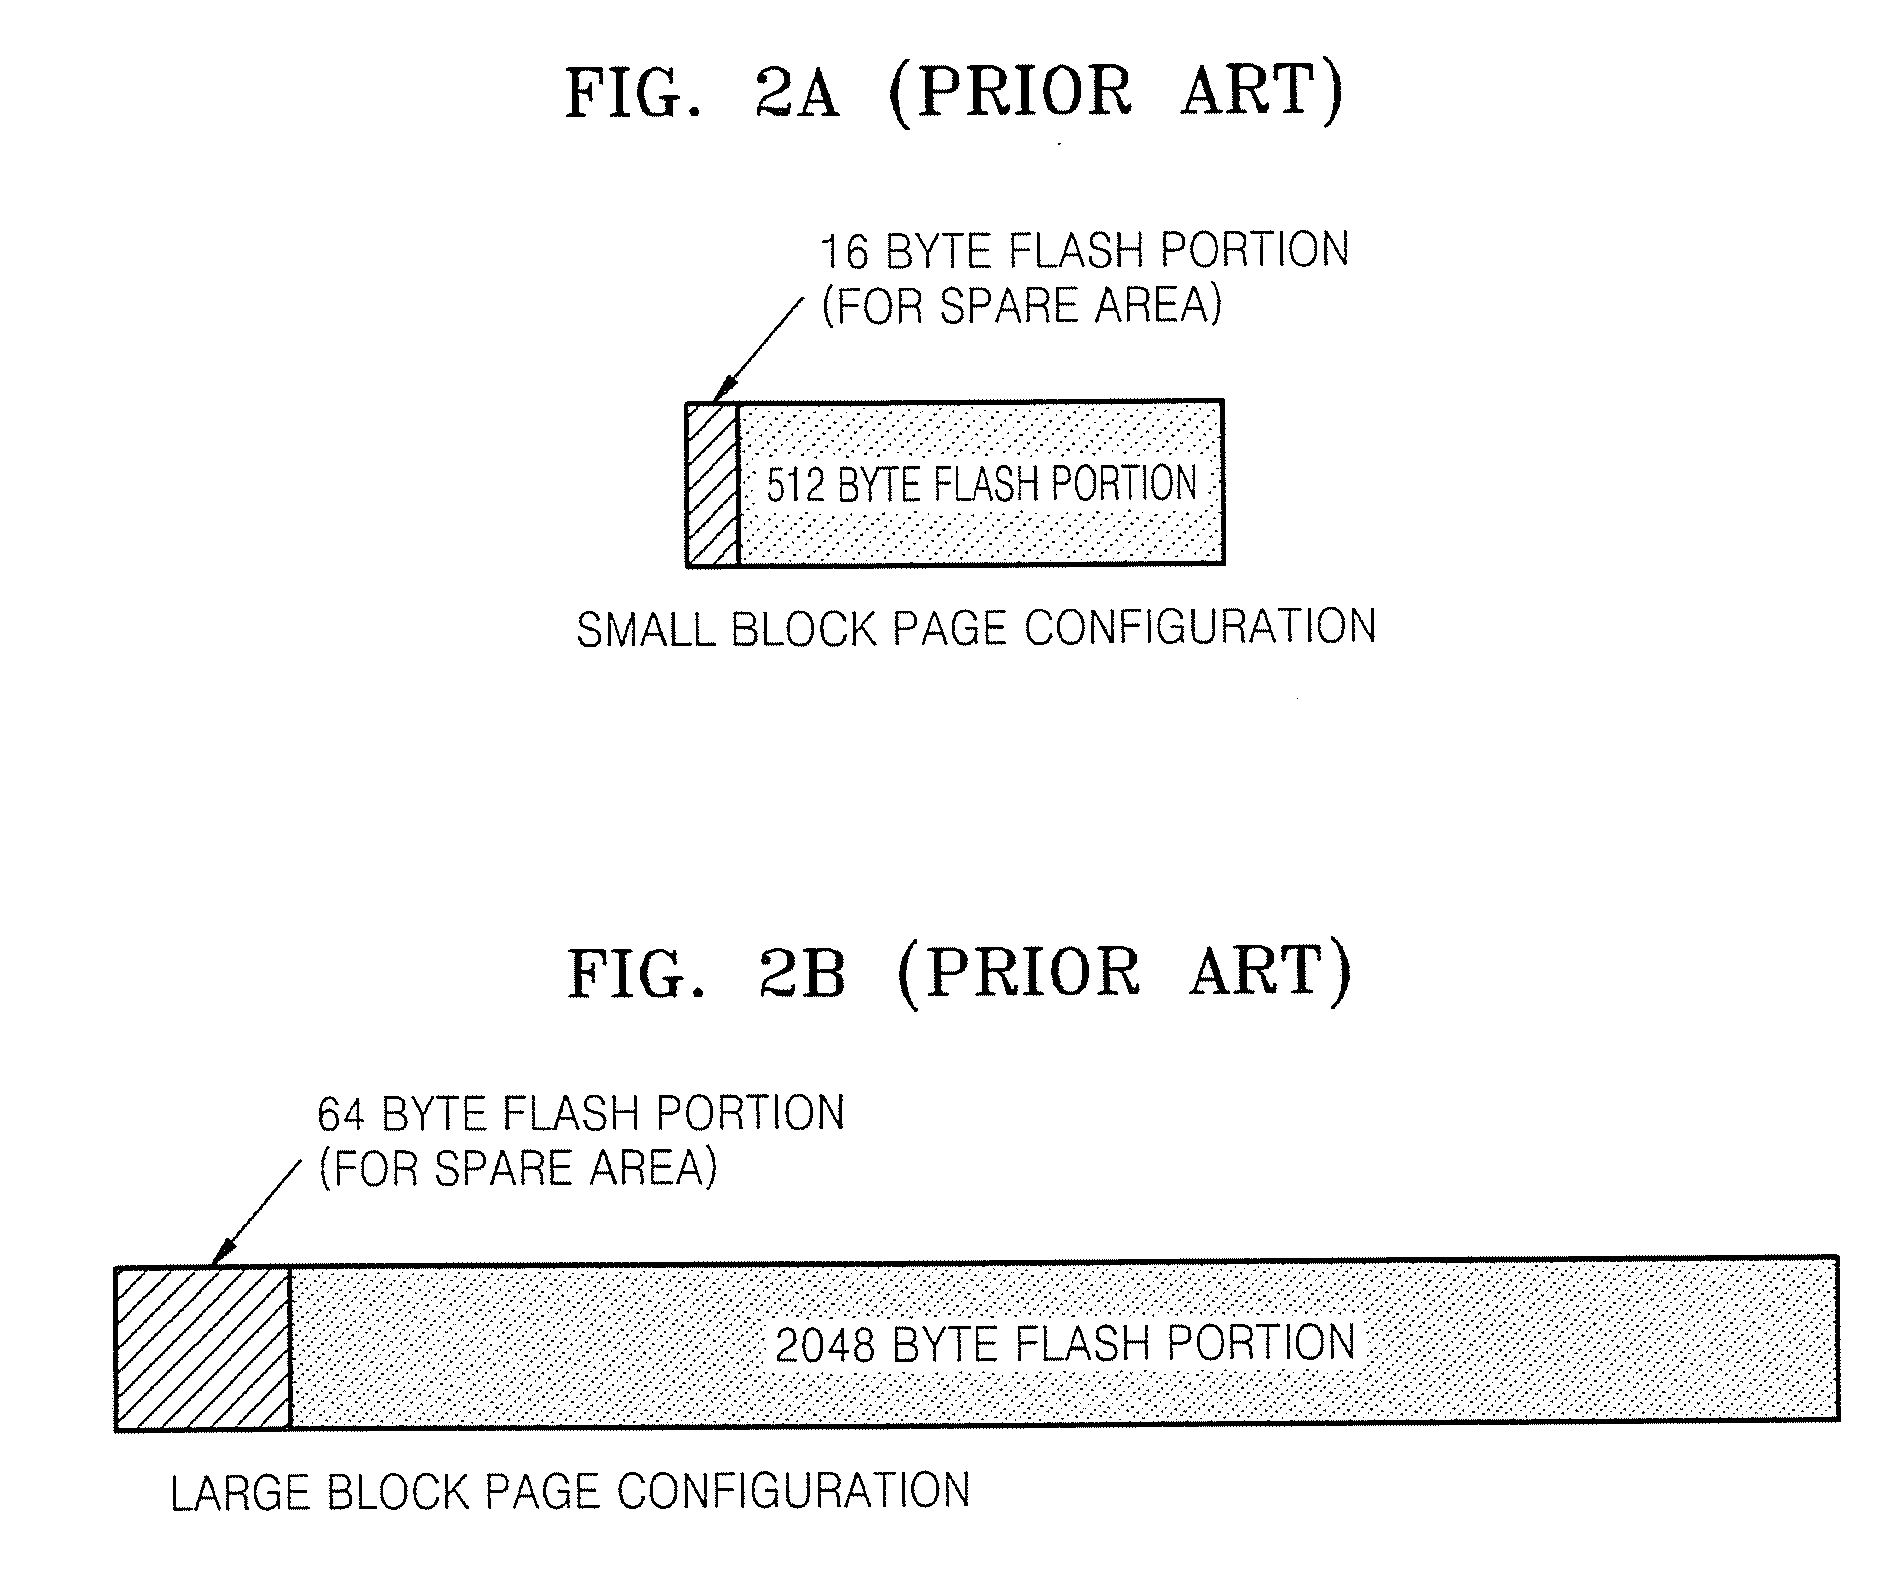 Memory device employing NVRAM and flash memory cells